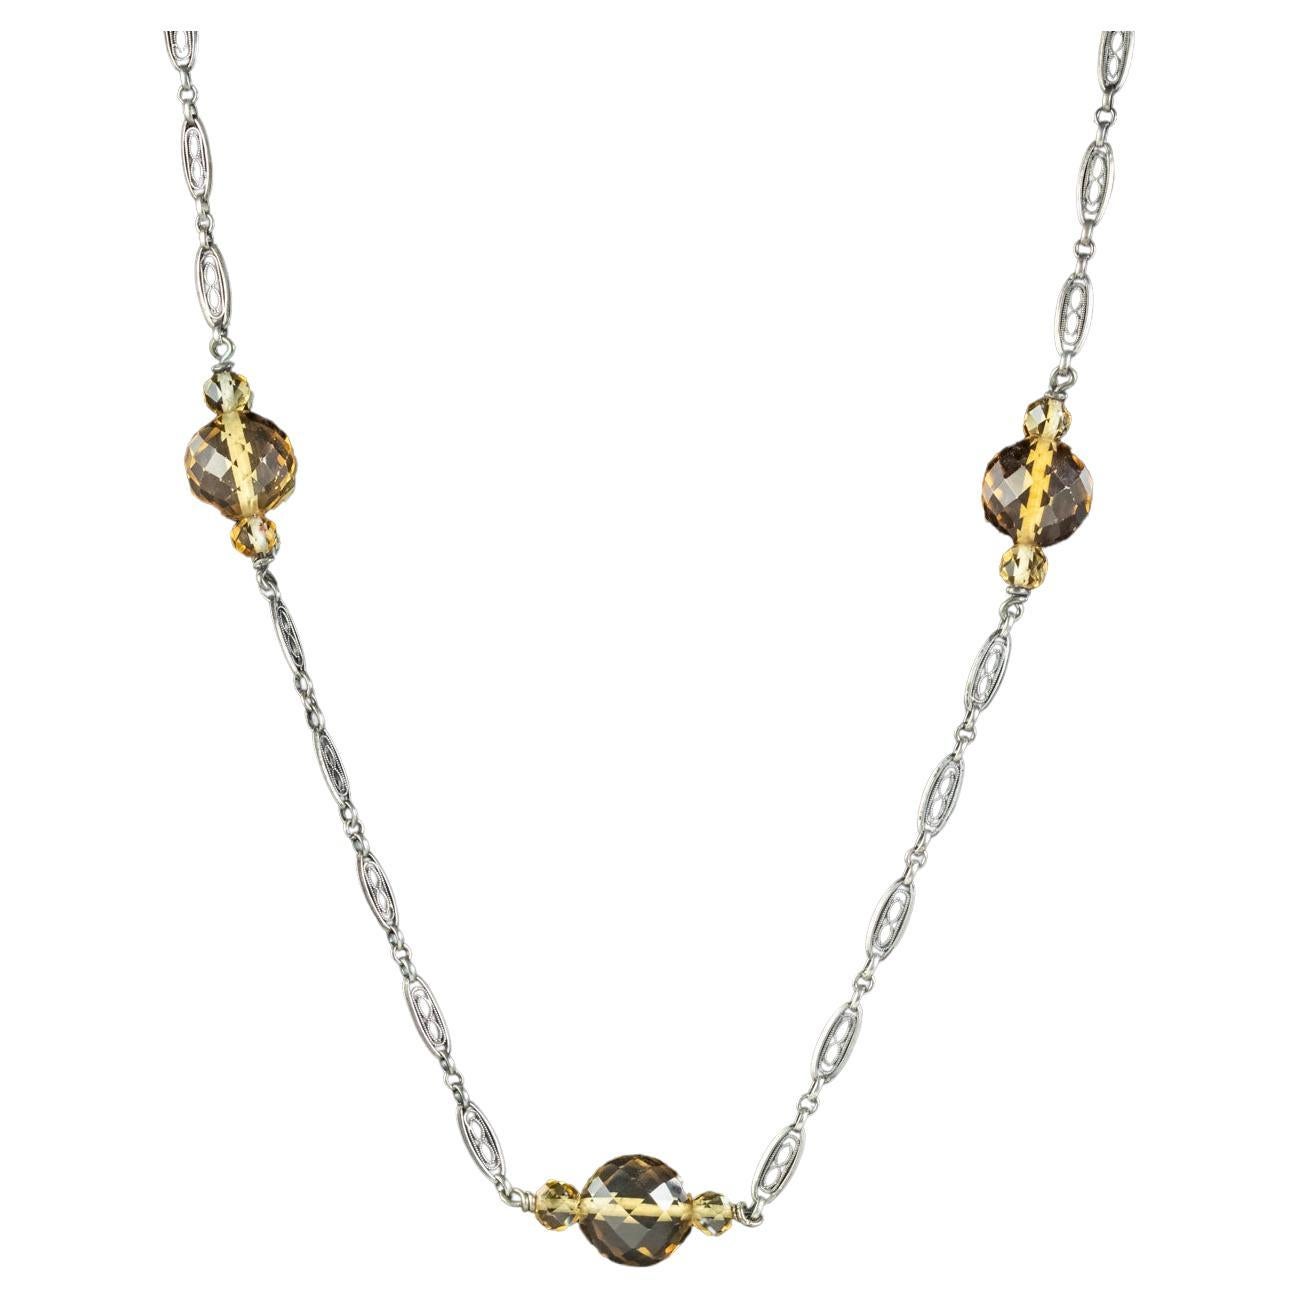 Antique Edwardian Citrine Bead Necklace Silver Chain For Sale